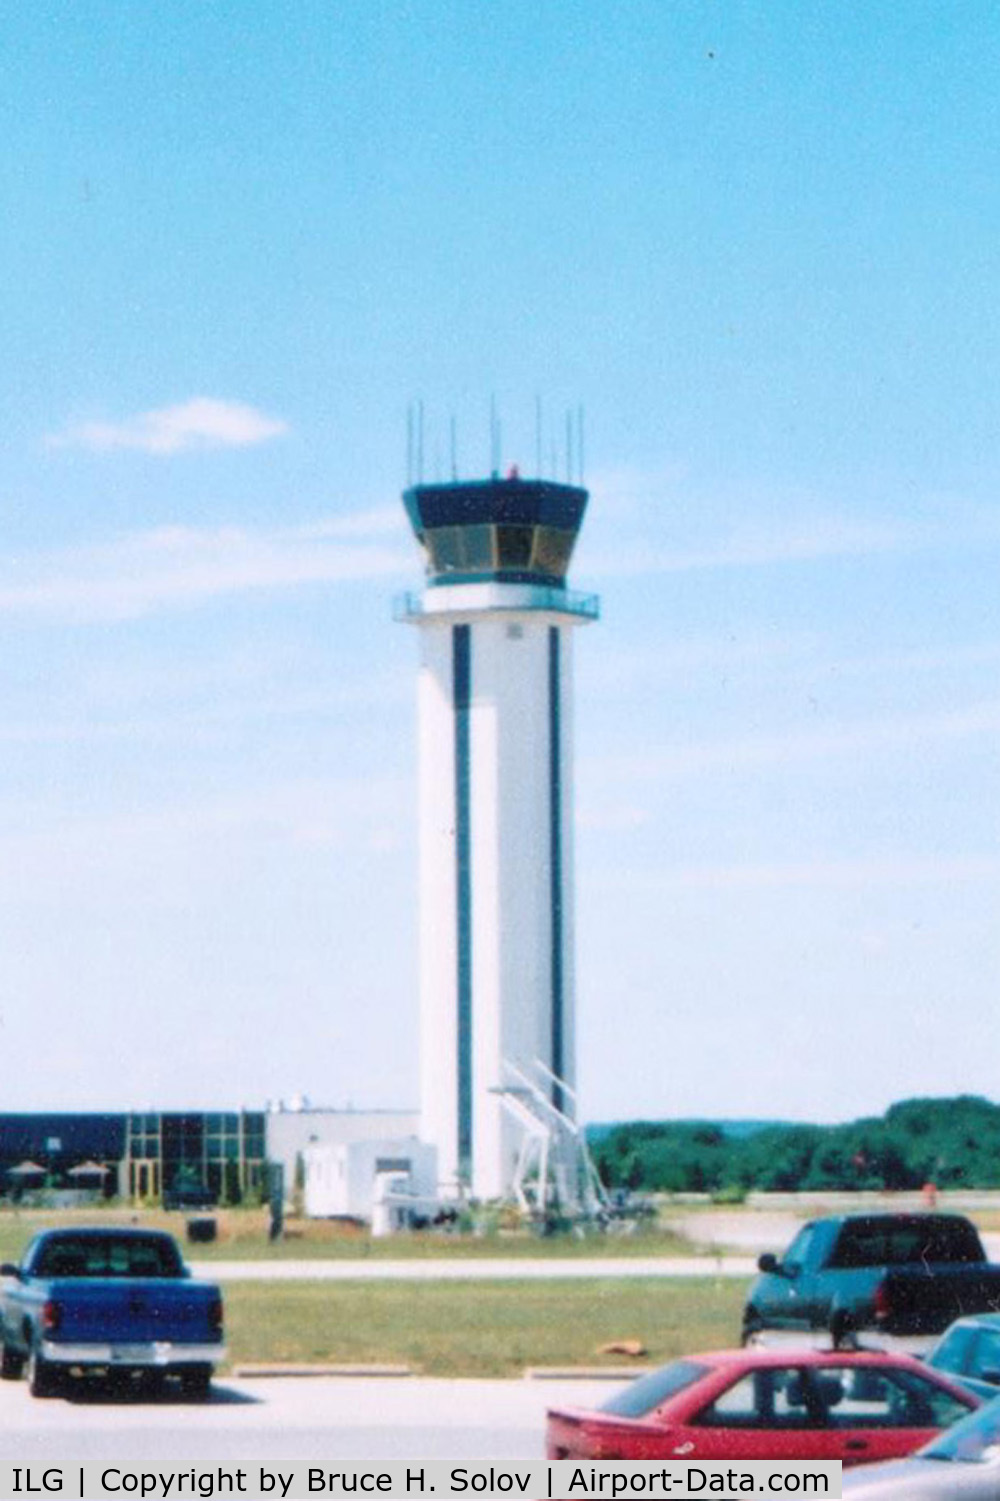 New Castle Airport (ILG) - The new ATC tower at New Castle County Airport